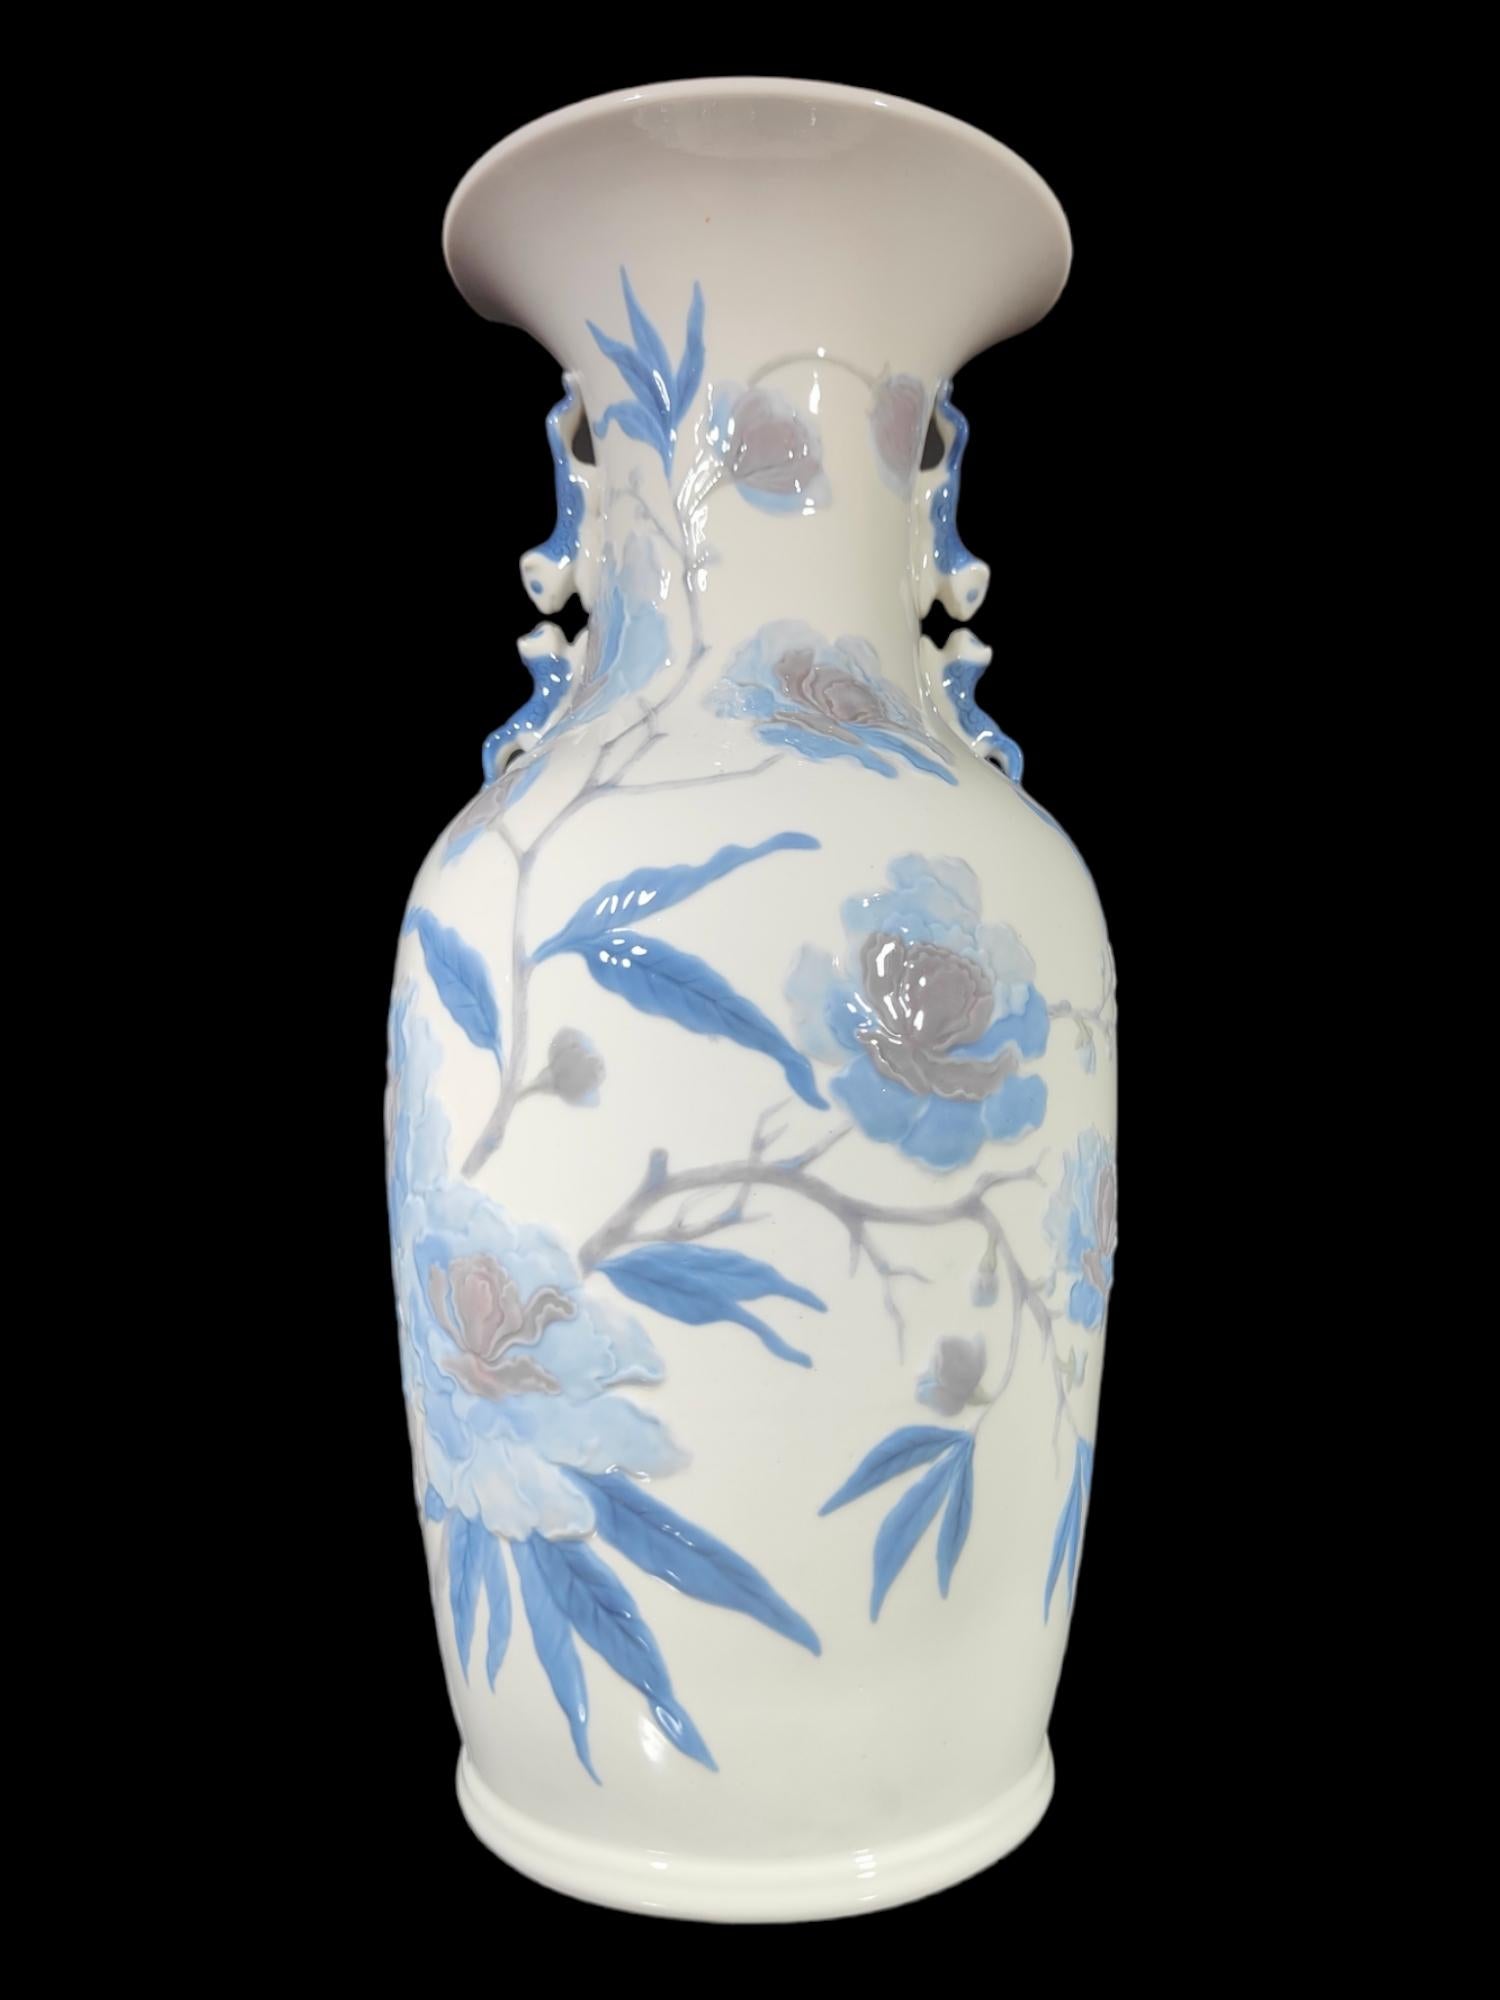 Lladro porcelain vase
Elegant lladro porcelain vase with butterflies in an Asian taste. Made by the sculptor: Julio Ruiz. Perfect condition. Height 48 cm
The Lladró factory is known for being the most prestigious firm of porcelain pieces in Spain.